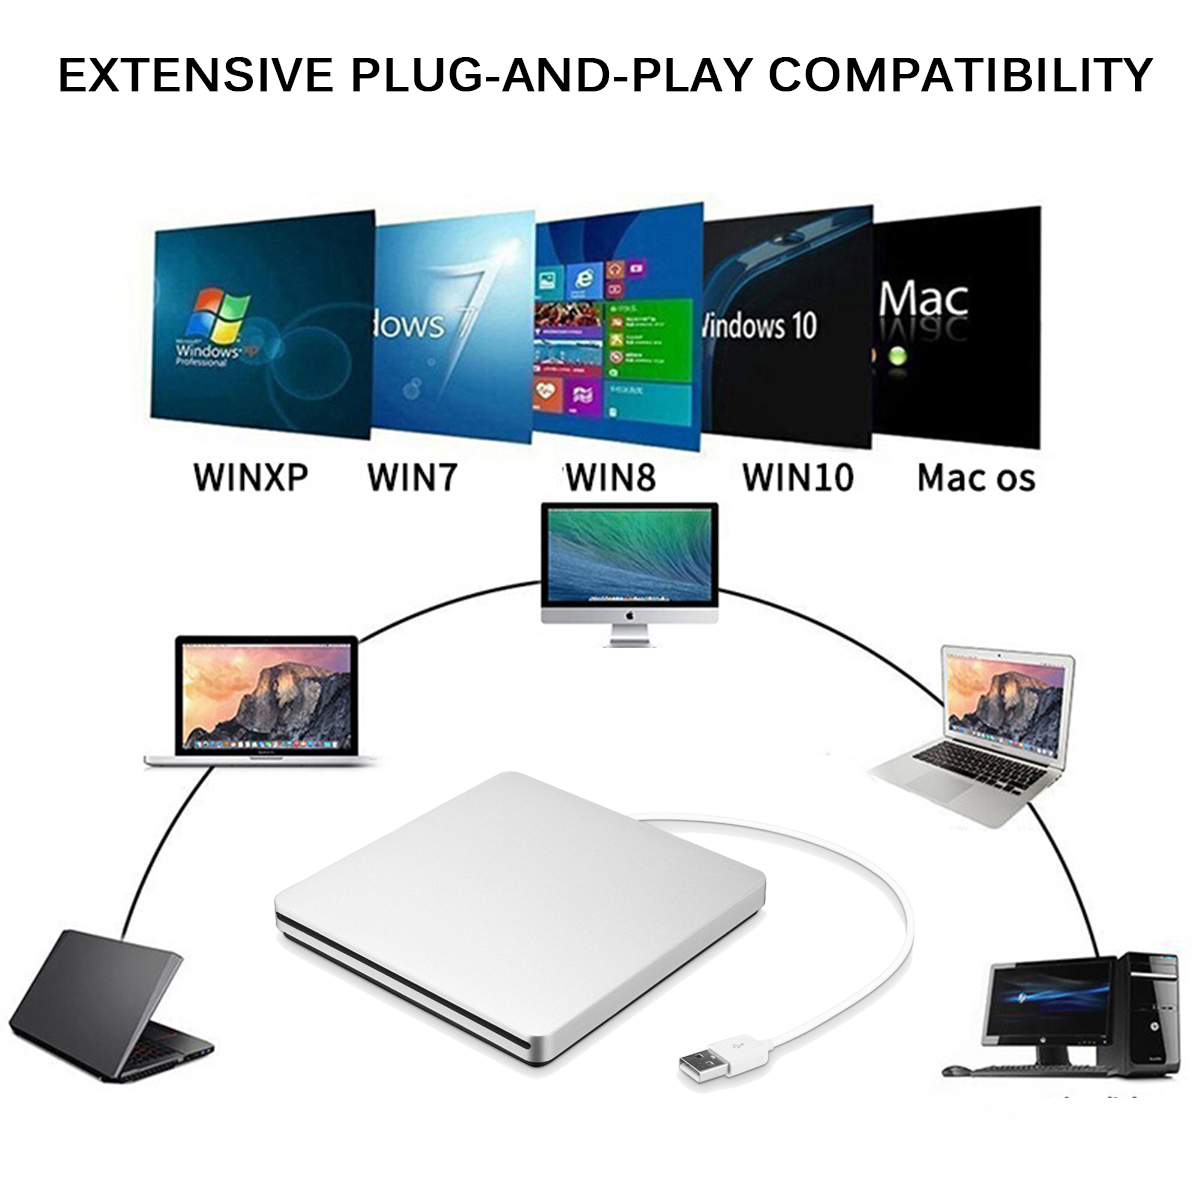 Portable-USB-30-Silver-External-DVD-RW-Max24X-High-speed-Data-Transmission-for-Win-XP-Win-7-Win-8-Wi-1701692-2